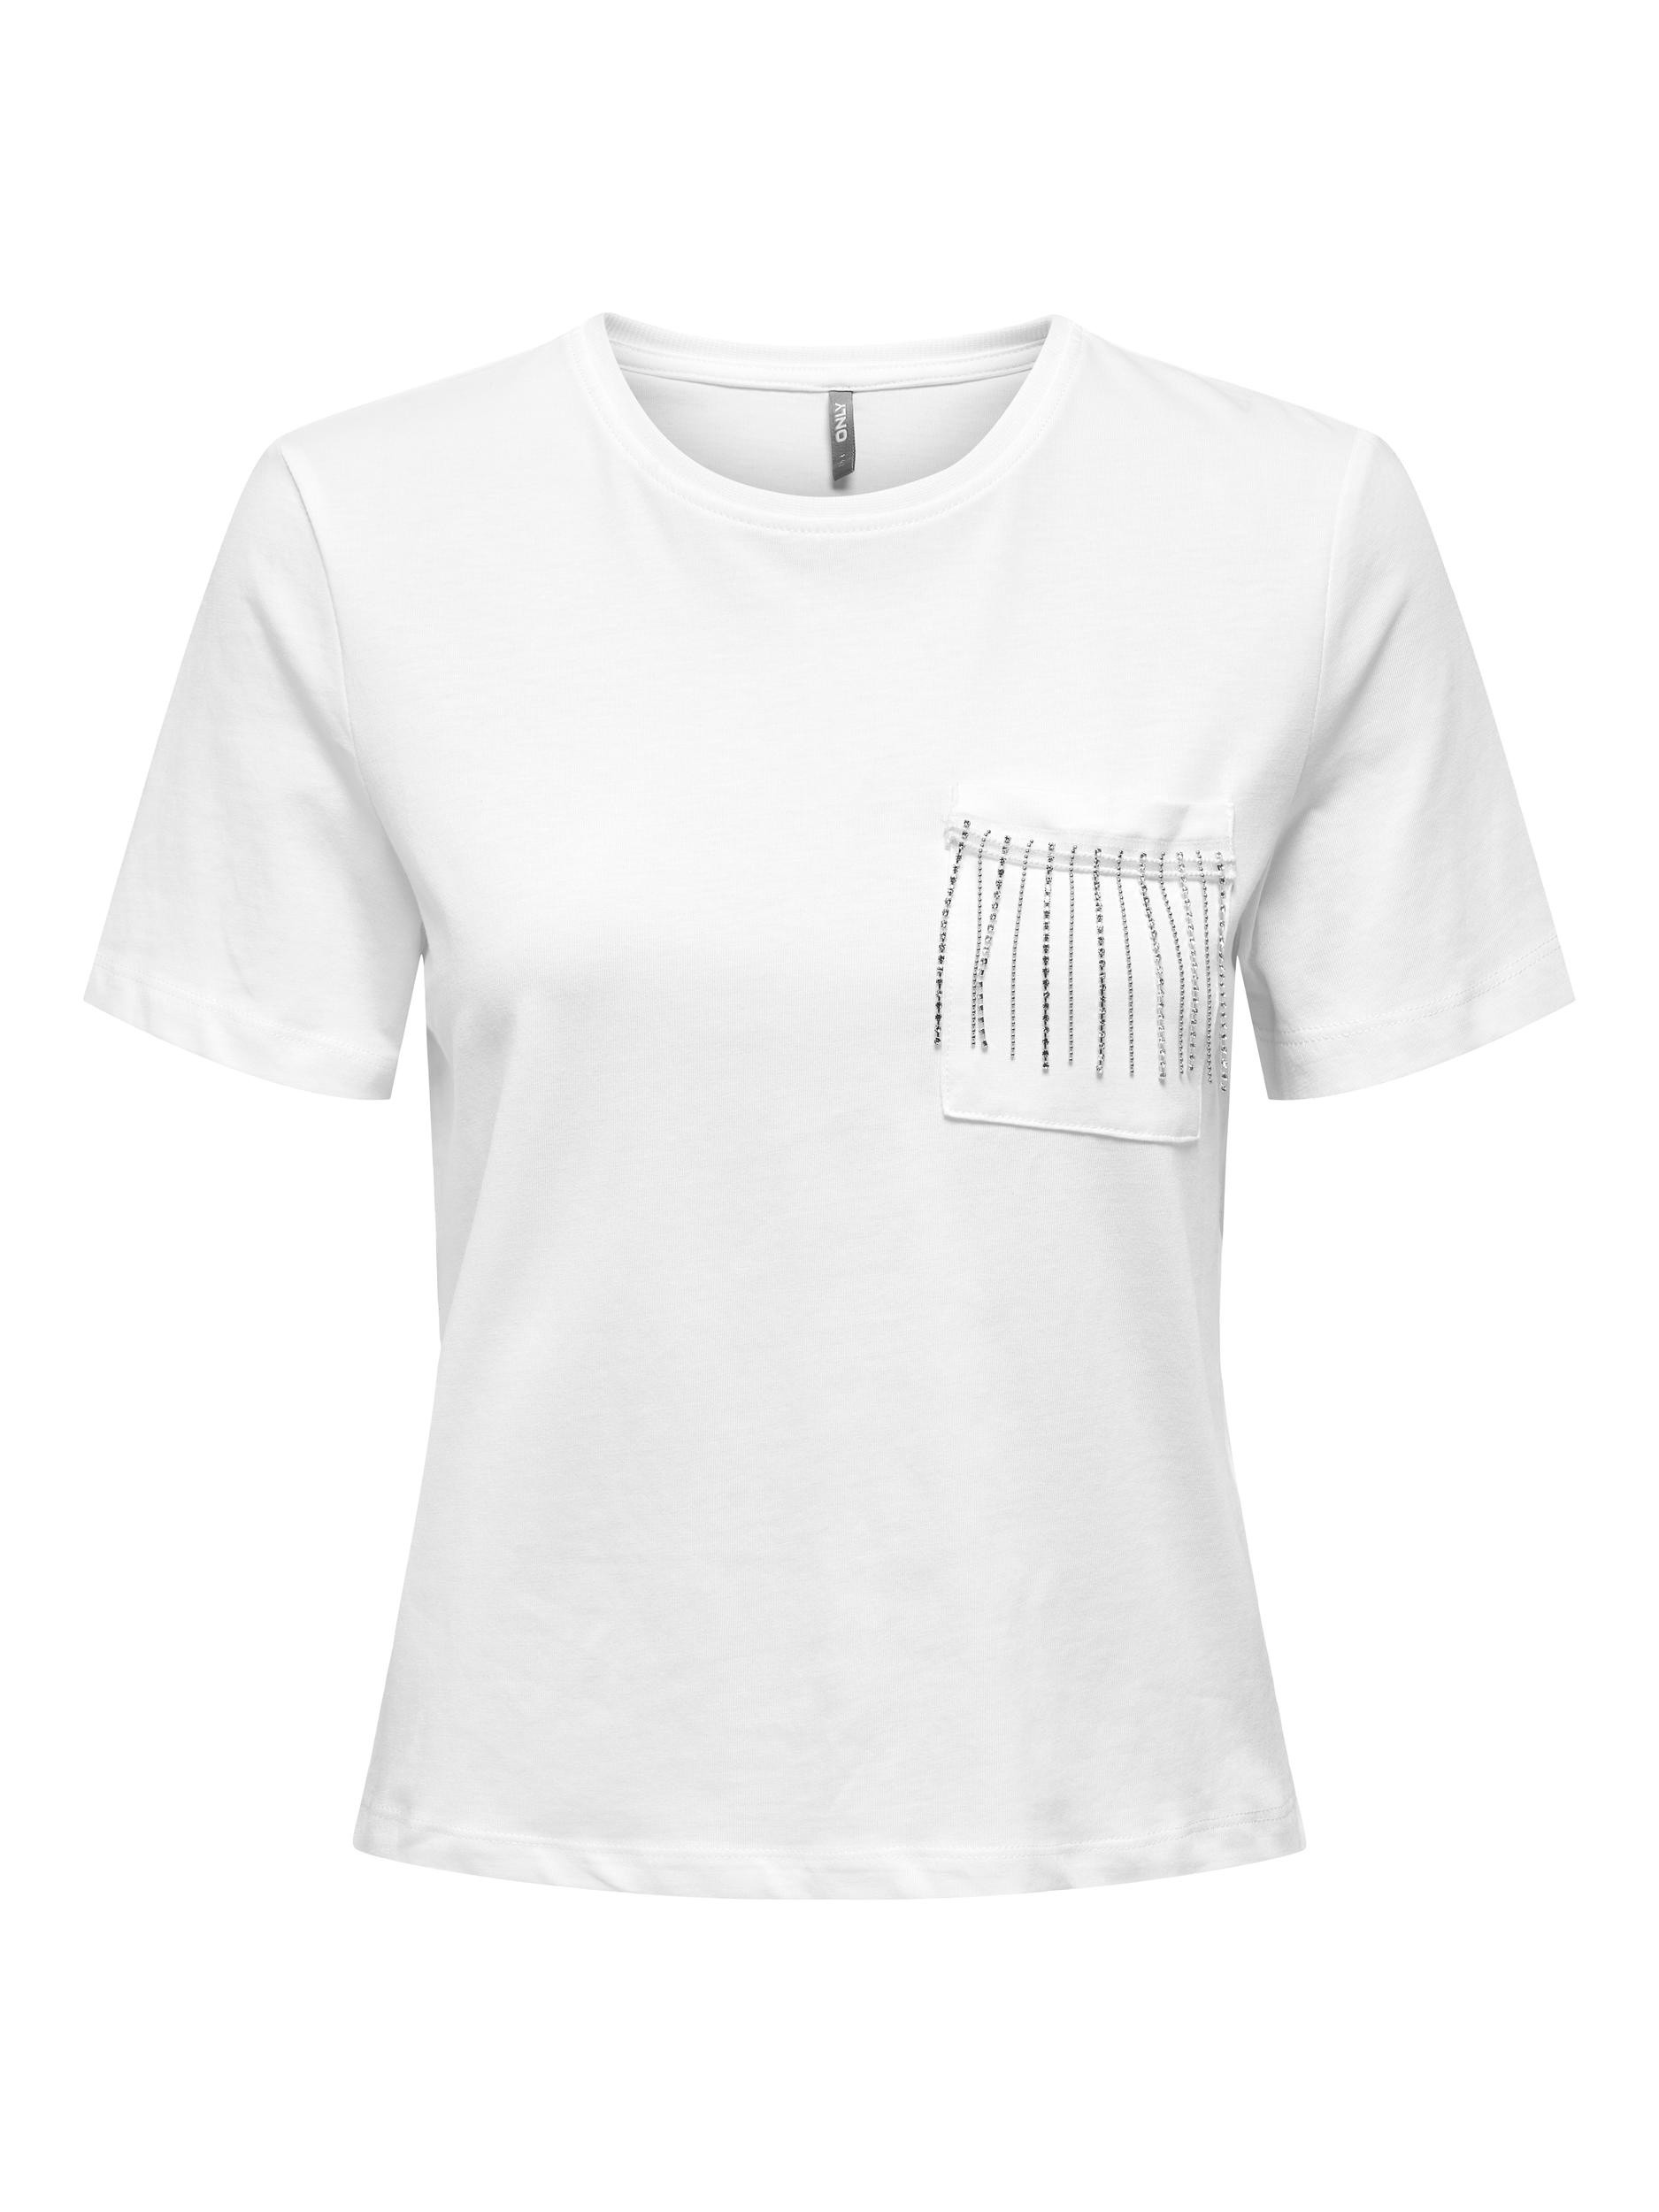 Only -T-shirt in cotone con strass, Bianco, large image number 0